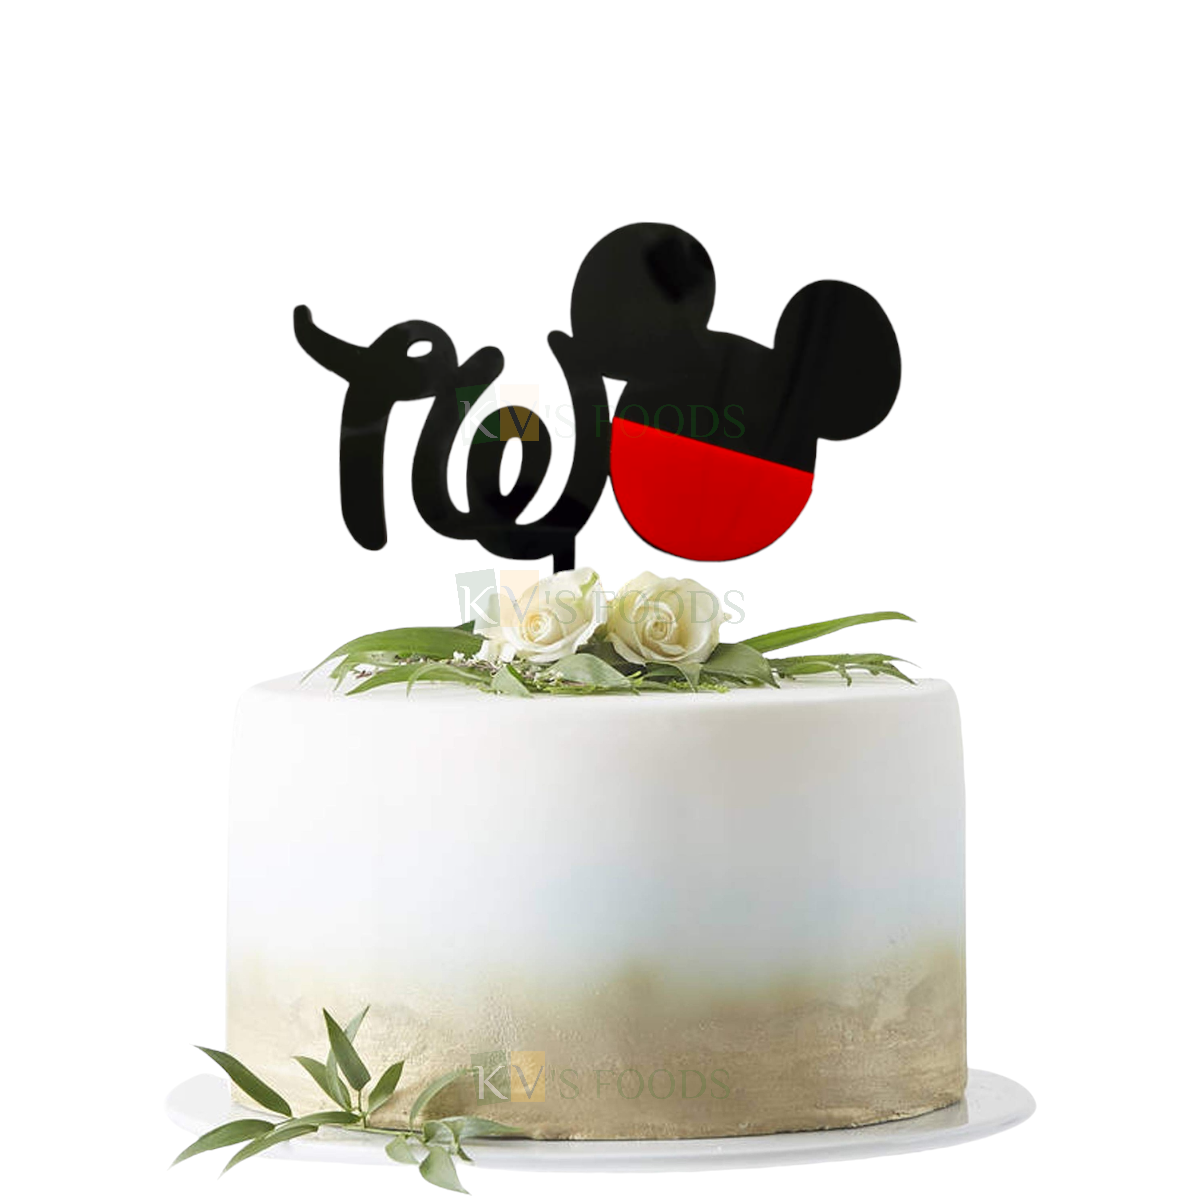 1PC Black Acrylic Two With Mickey Mouse Cake Topper Second Happy Birthday Theme, 2nd Birthday Celebration Cake Topper, Two Number Theme Cake Topper Children's Cartoon Cake Topper DIY Cake Decorations